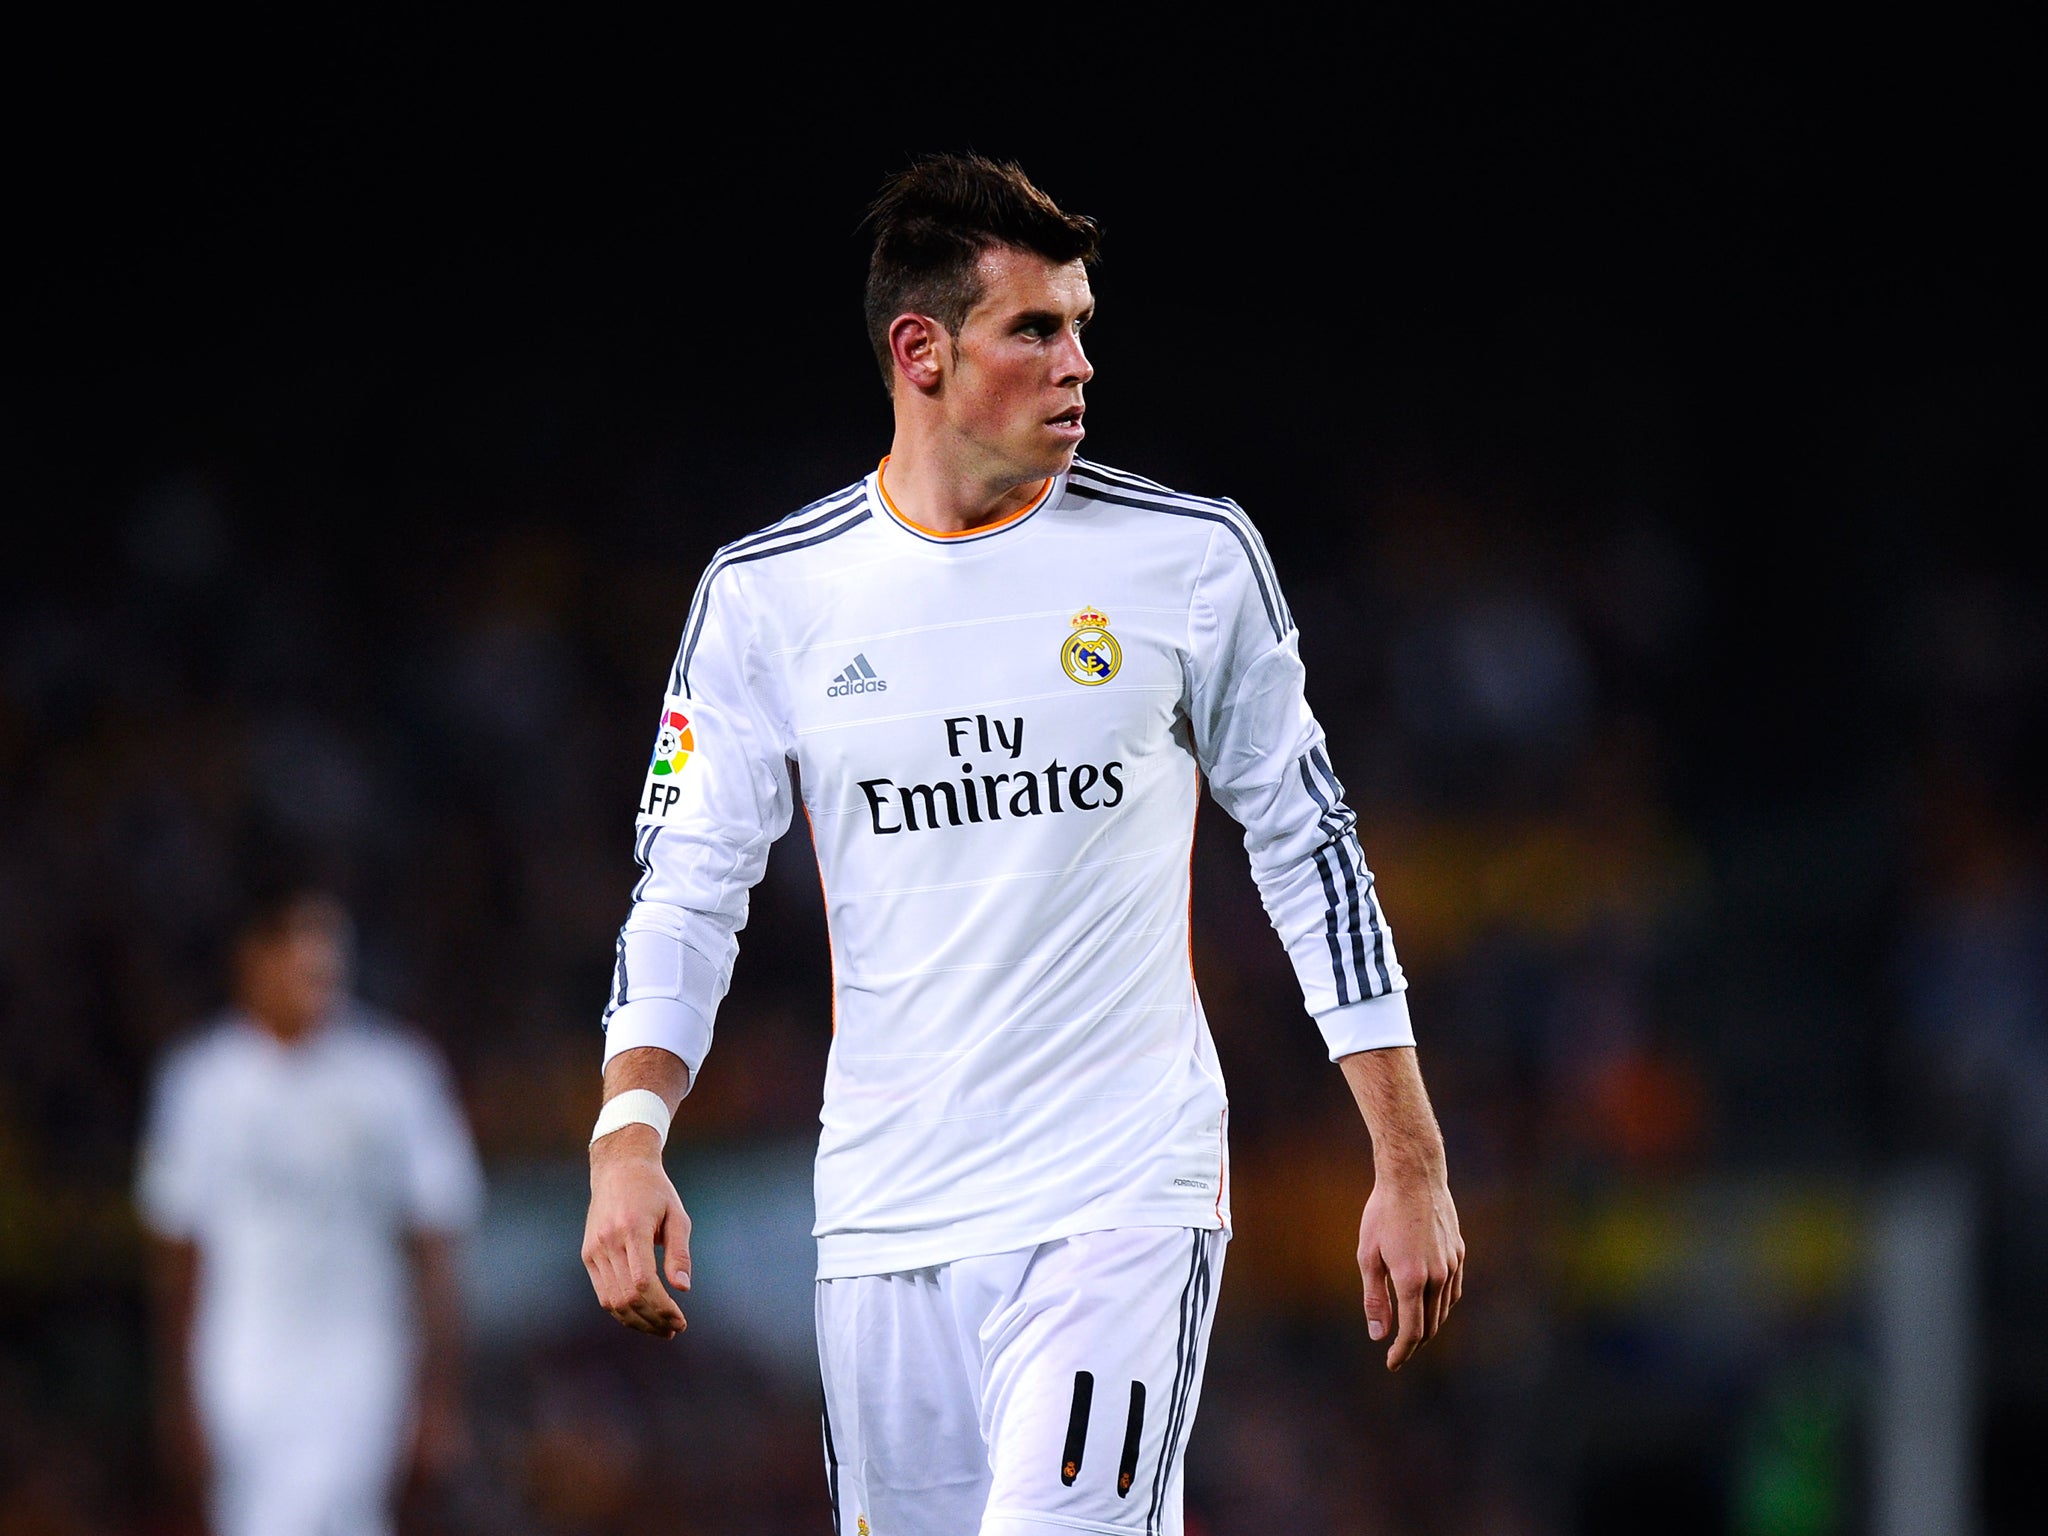 Gareth Bale has been named on the shortlist for the 2013 Fifa Ballon d'Or